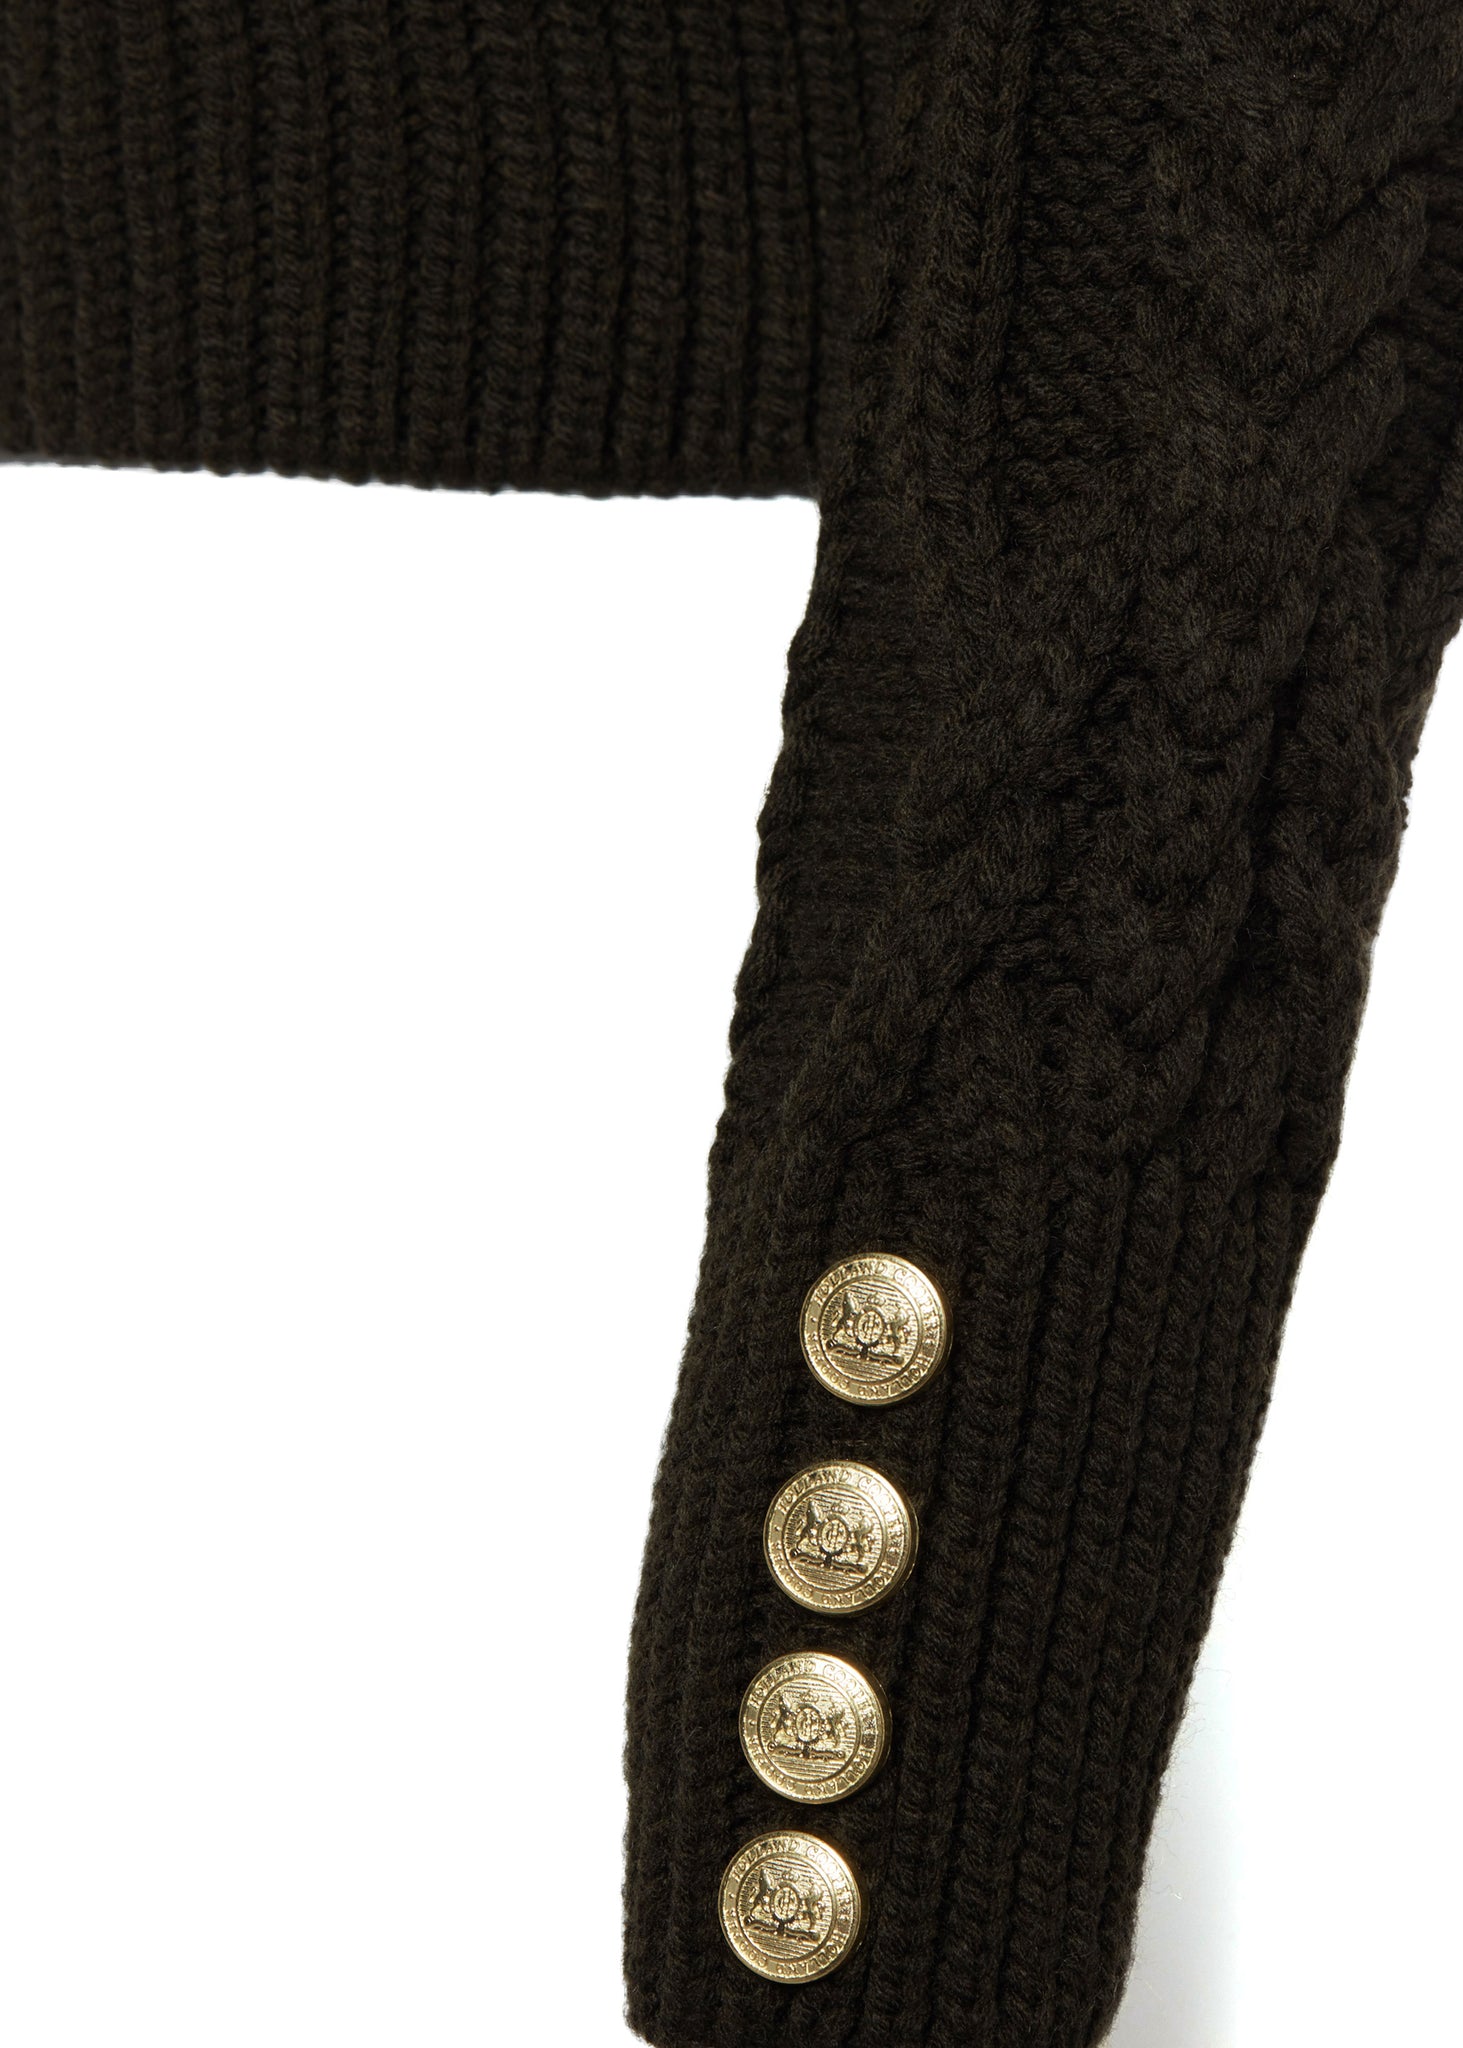 gold button detail on cuffs of a chunky cable knit roll neck jumper in fern green with dropped shoulders and thick ribbed cable trims and gold buttons on cuffs and collar